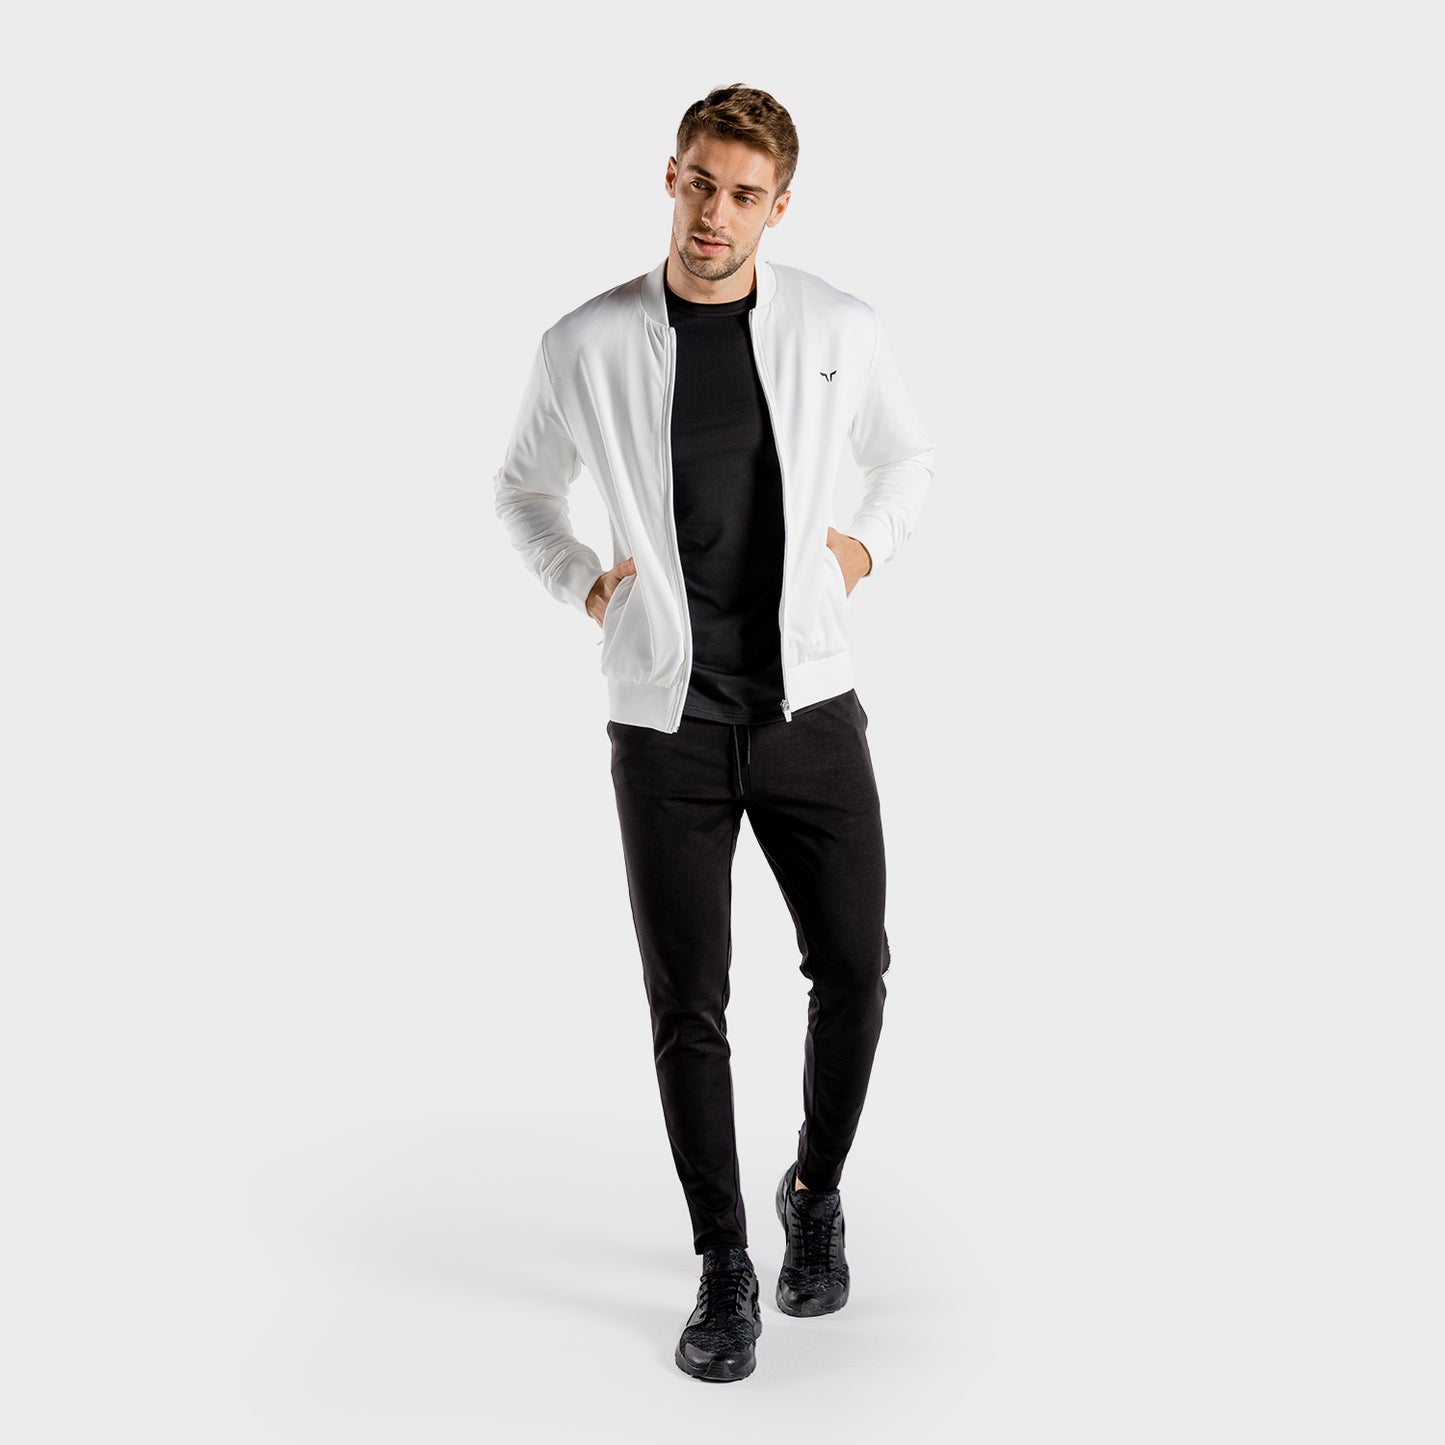 squatwolf-workout-hoodies-for-men-flux-bomber-white-gym-wear